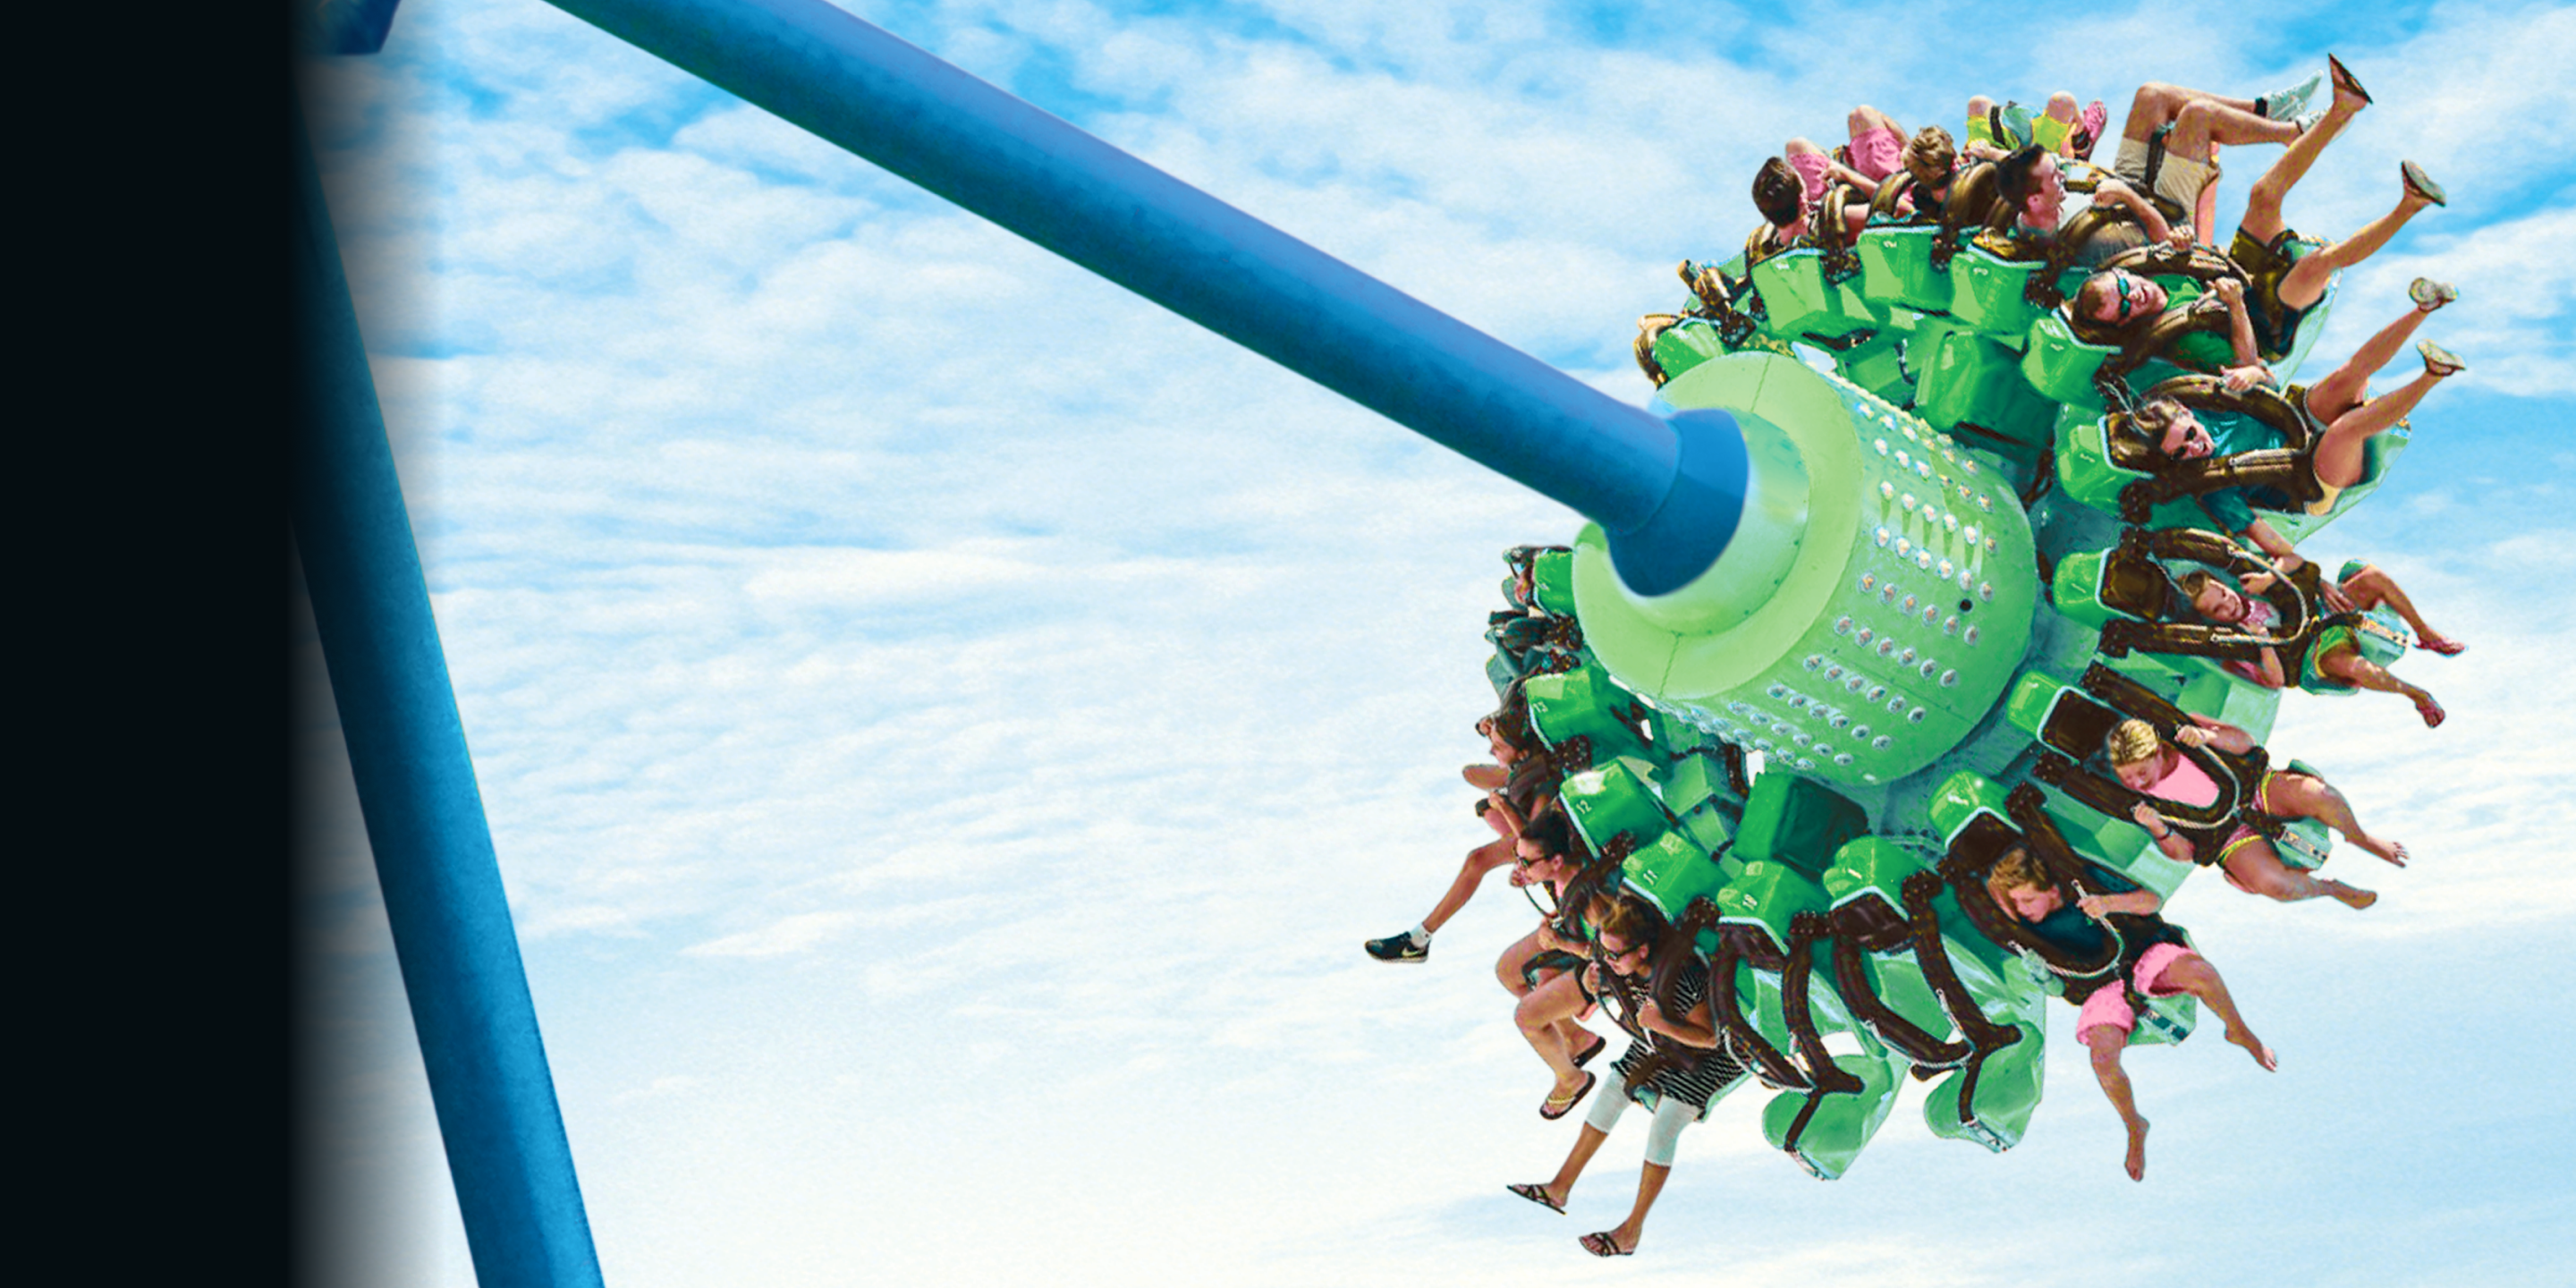 The Sea Swinger ride with people in the seats viewed from below